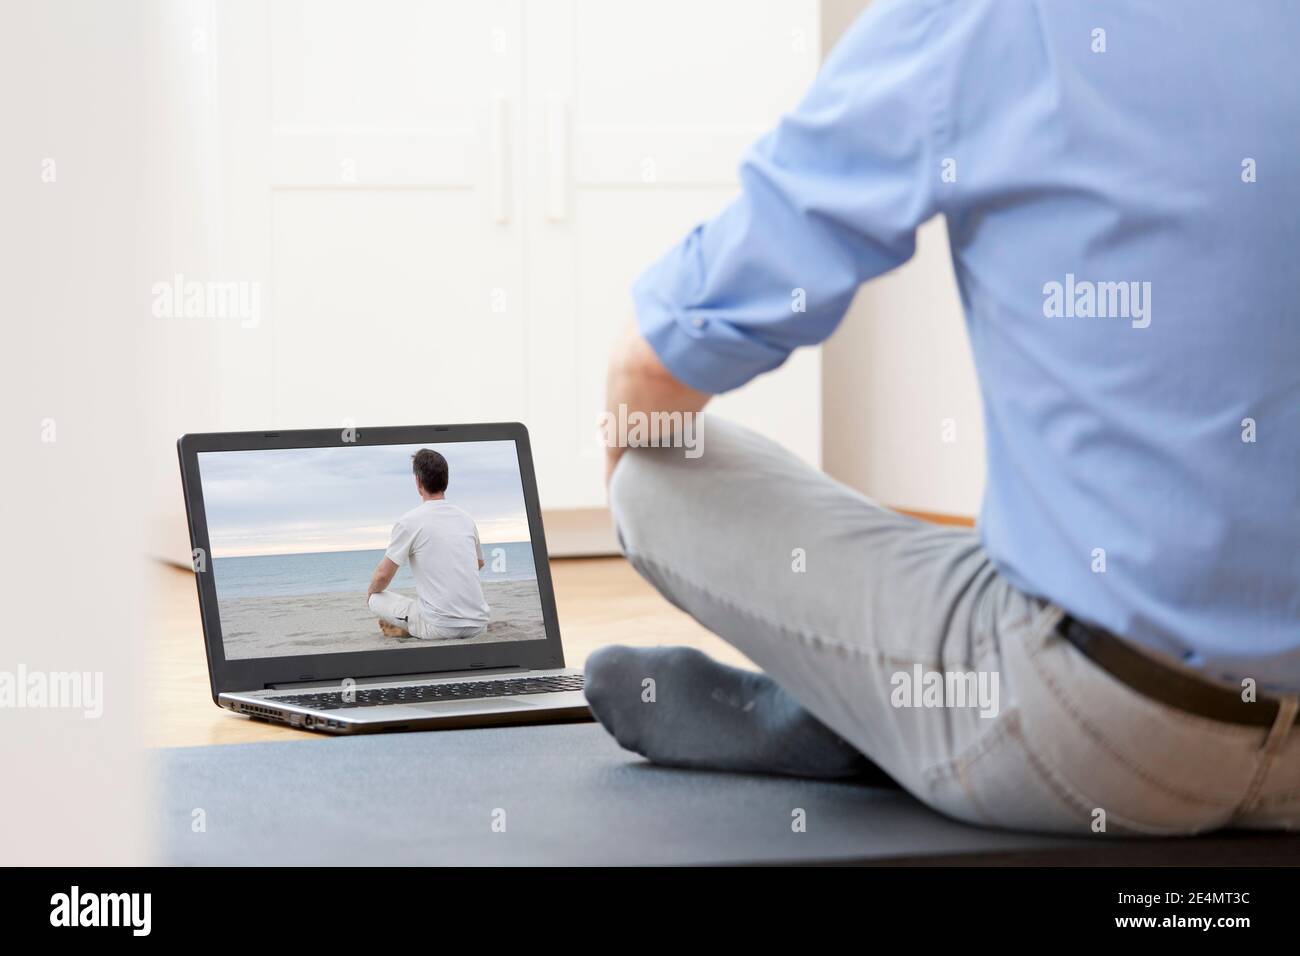 Businessman doing yoga or meditation exercise in front of laptop with man doing yoga on a beach - focus on the screen Stock Photo